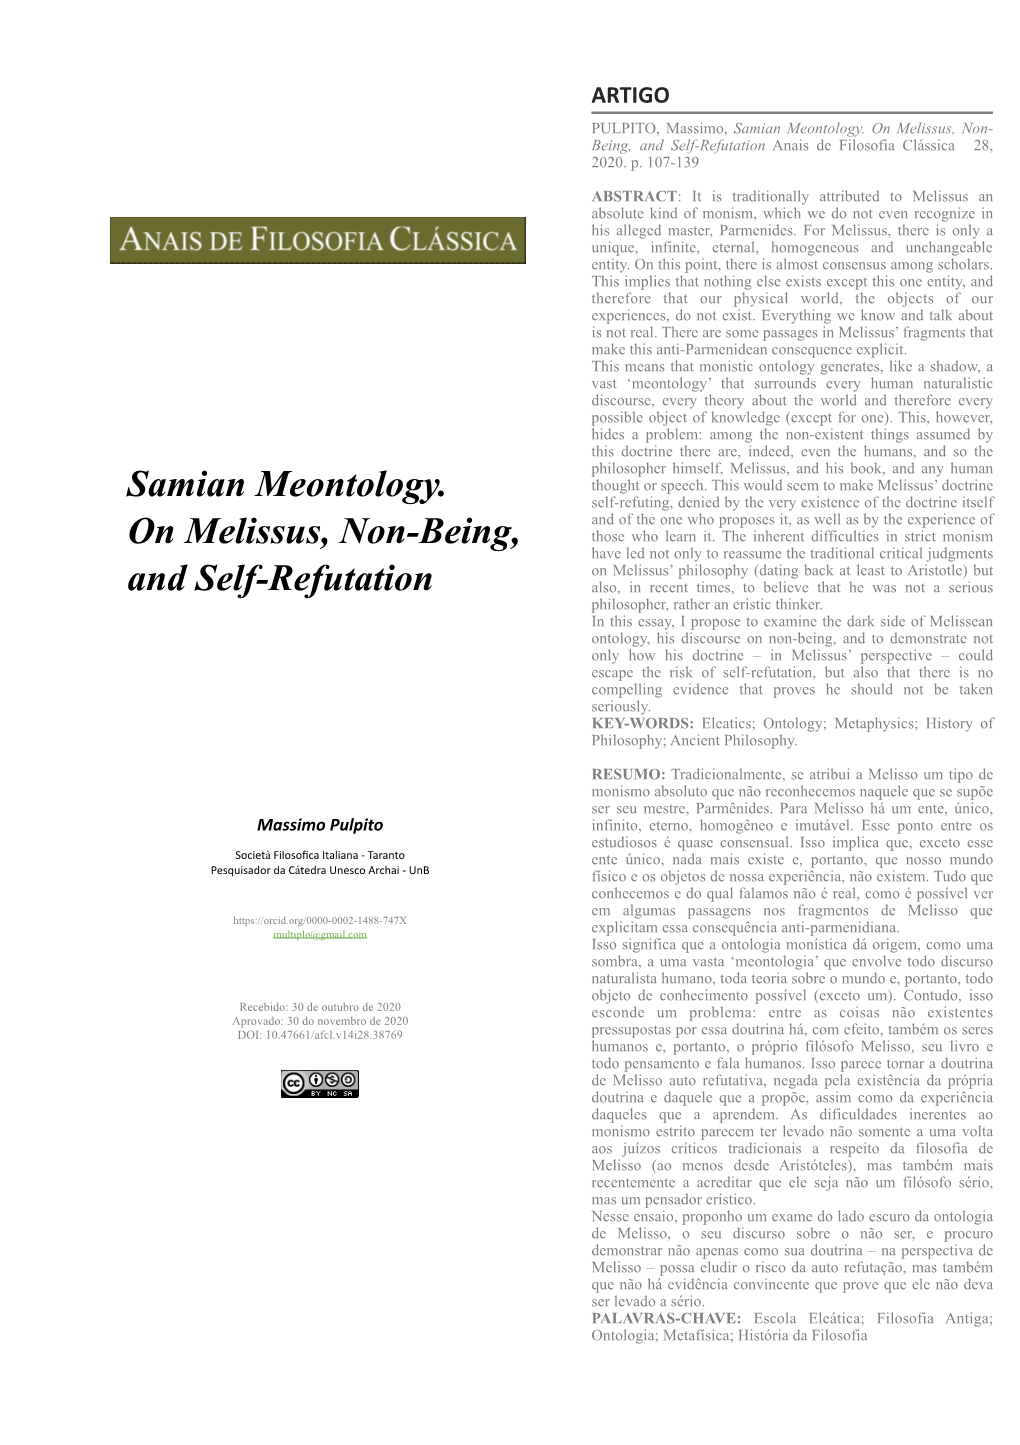 Samian Meontology. on Melissus, Non-Being, And